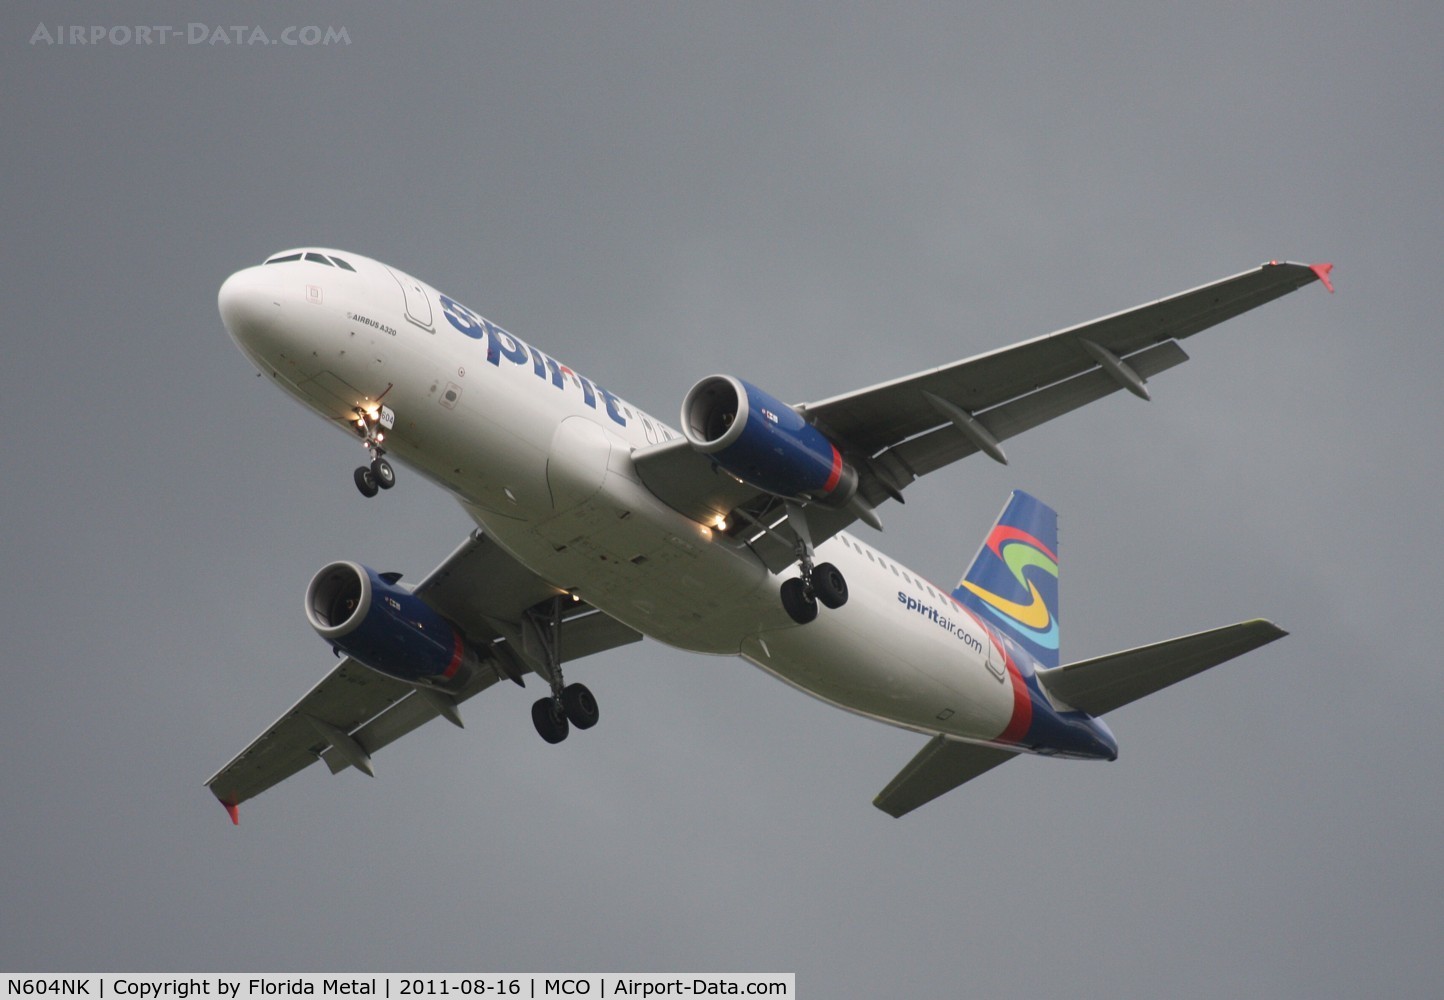 N604NK, 2010 Airbus A320-232 C/N 4431, Spirit A320 with storm approaching